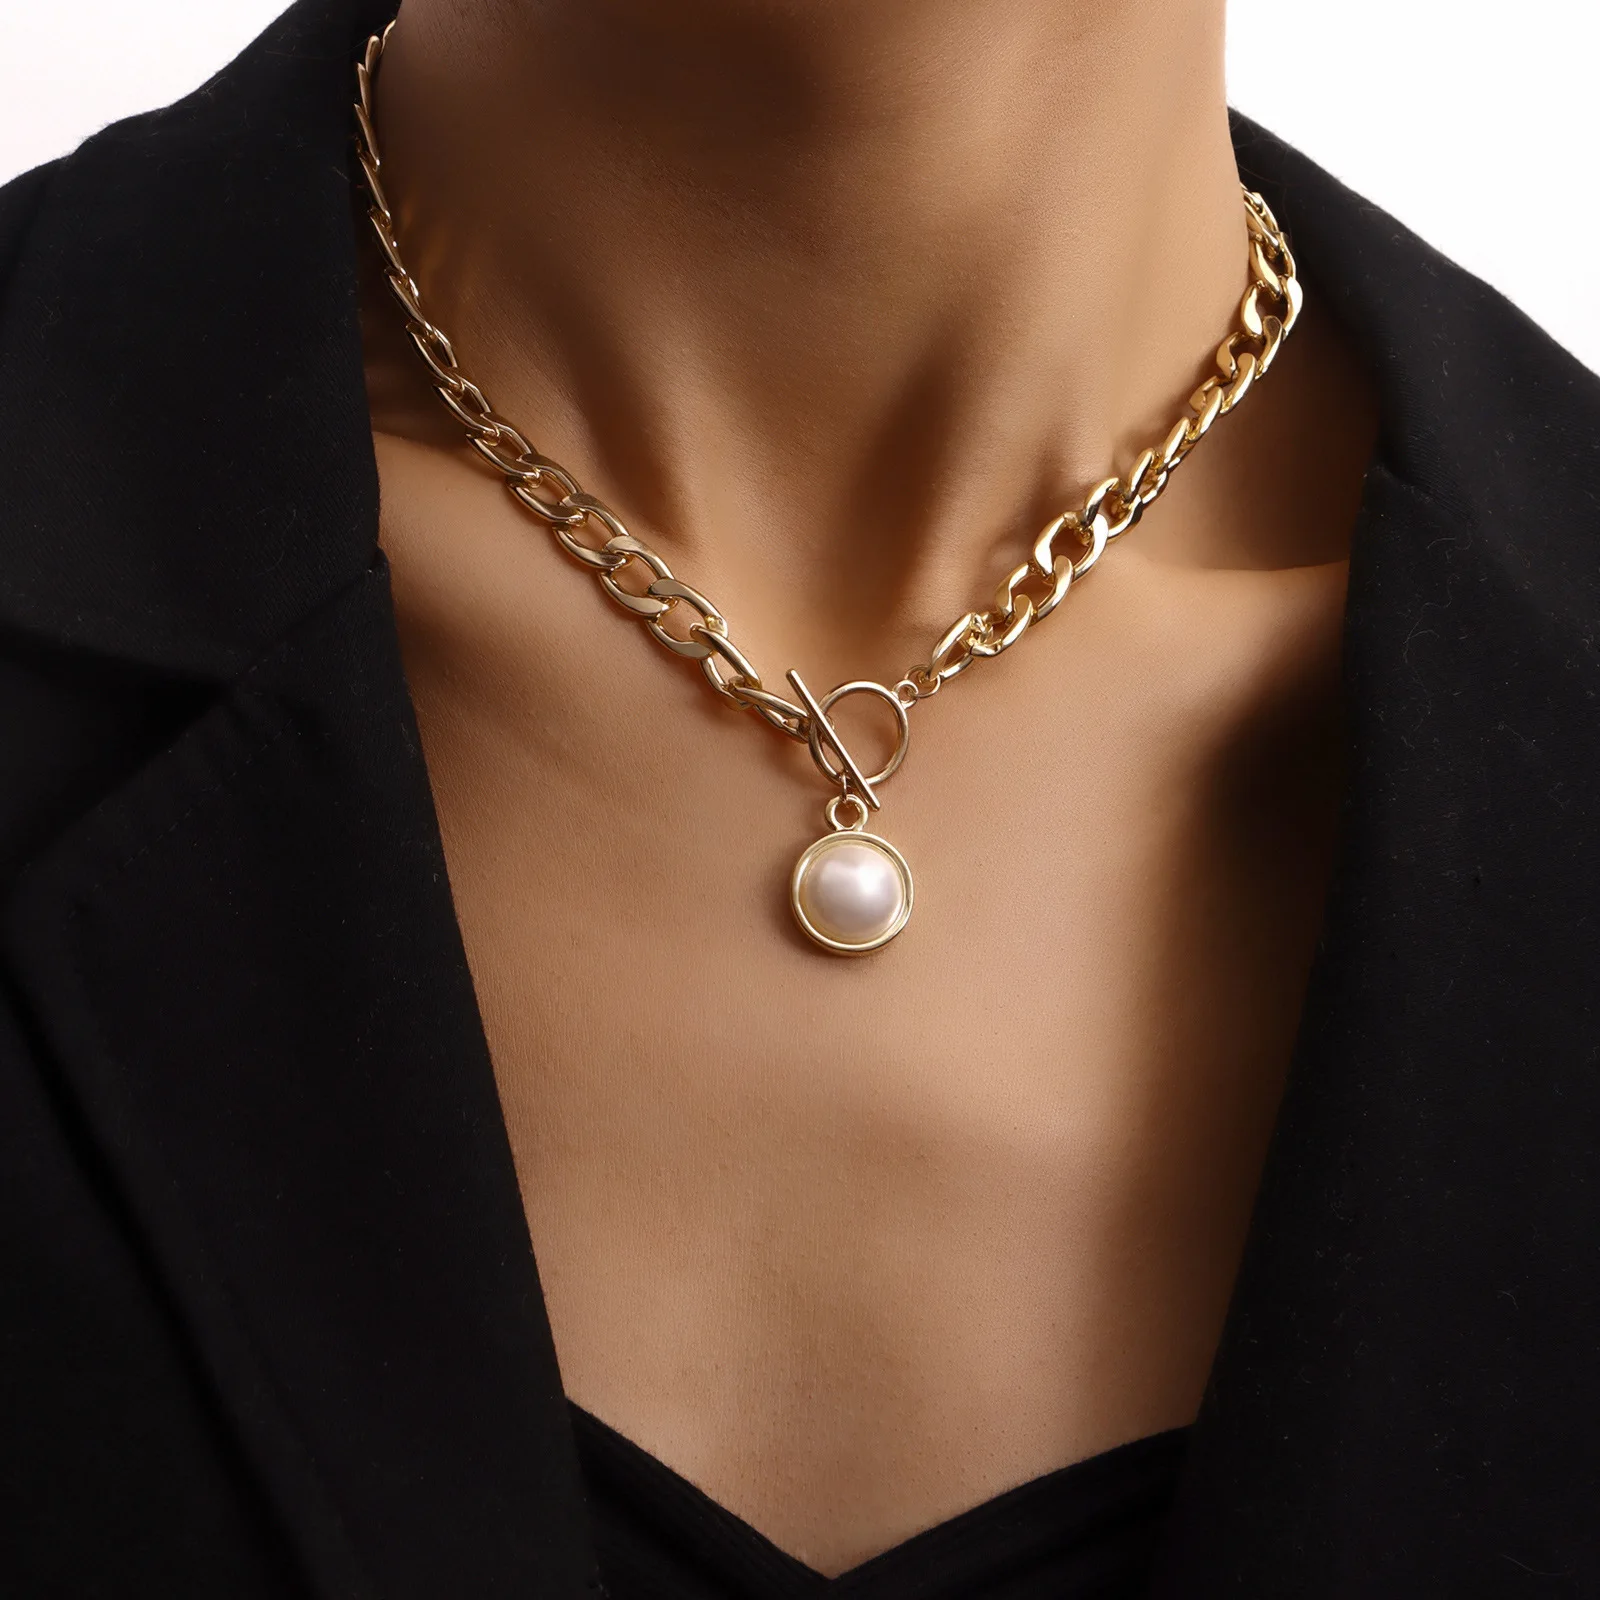 Ingemark Kpop Goth Baroque Pearl Coin Pendant Choker Necklace for Women On The Neck OT Buckle Lariat Clavicle Chain Jewelry INS